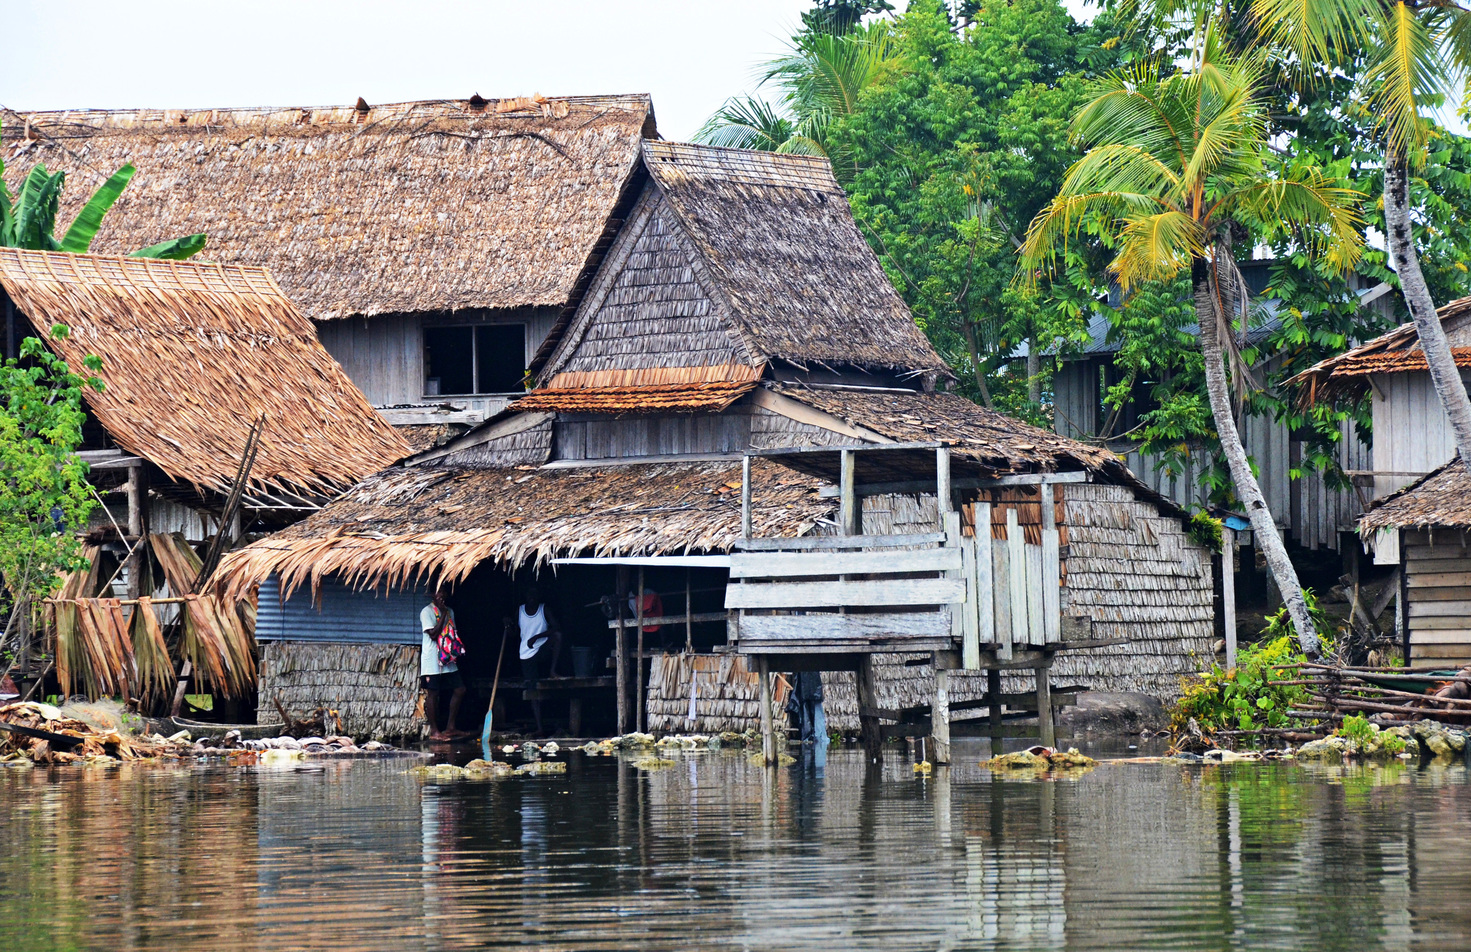 Sea-Level Rise Has Claimed Five Whole Islands In The Pacific: First Scientific Evidence